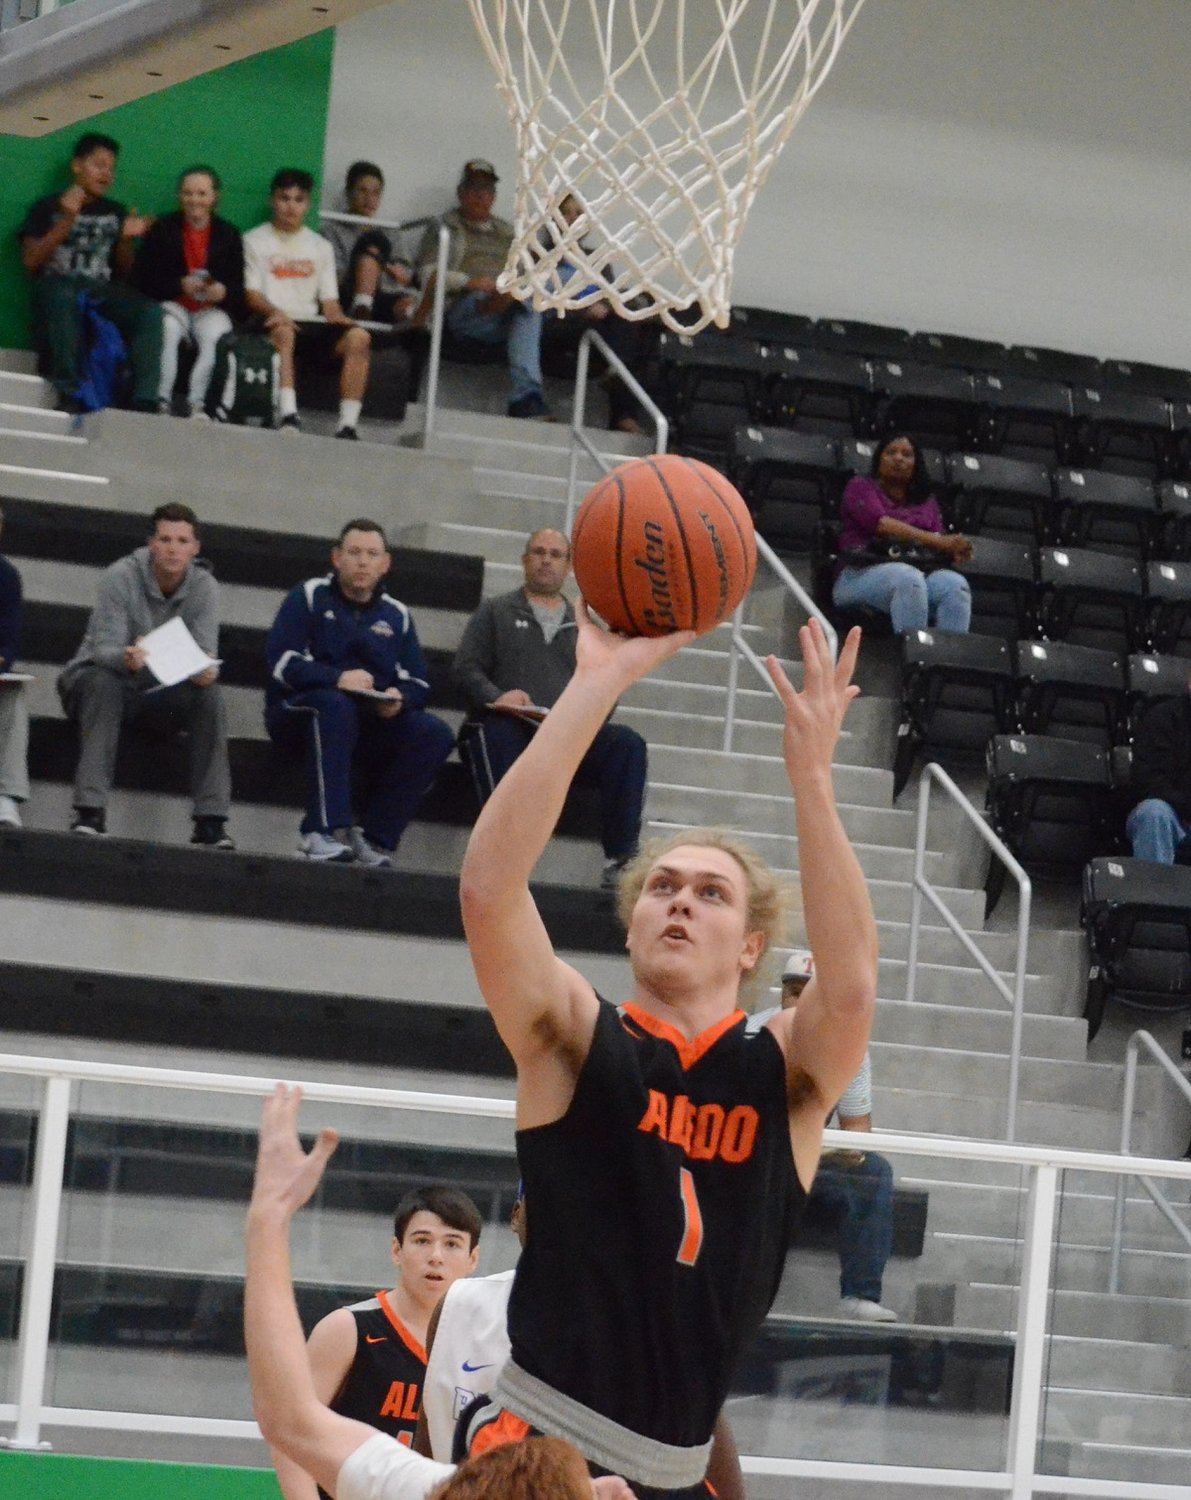 Aledo senior post Cam Caldwell puts up a short jumper Friday night during the Bearcats' loss to Boswell in a District 6-5A fourth-place tiebreaker game at Azle. Caldwell led the Bearcats with 17 points. Photo by Tony Eierdam